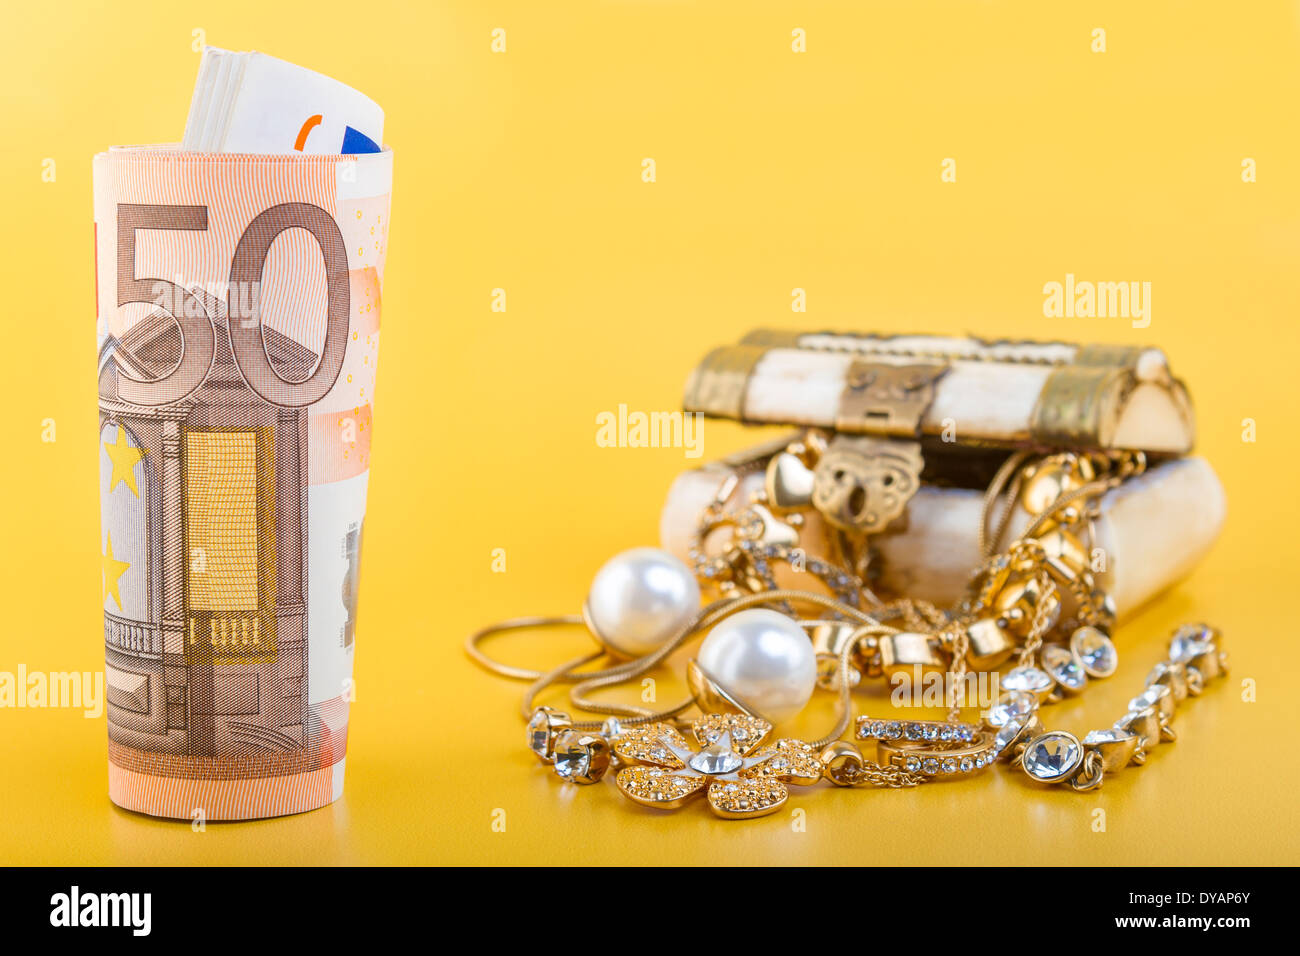 Cash for Gold Jewelry Concept - Concept or Metaphor for selling old gold jewelry for cash Stock Photo